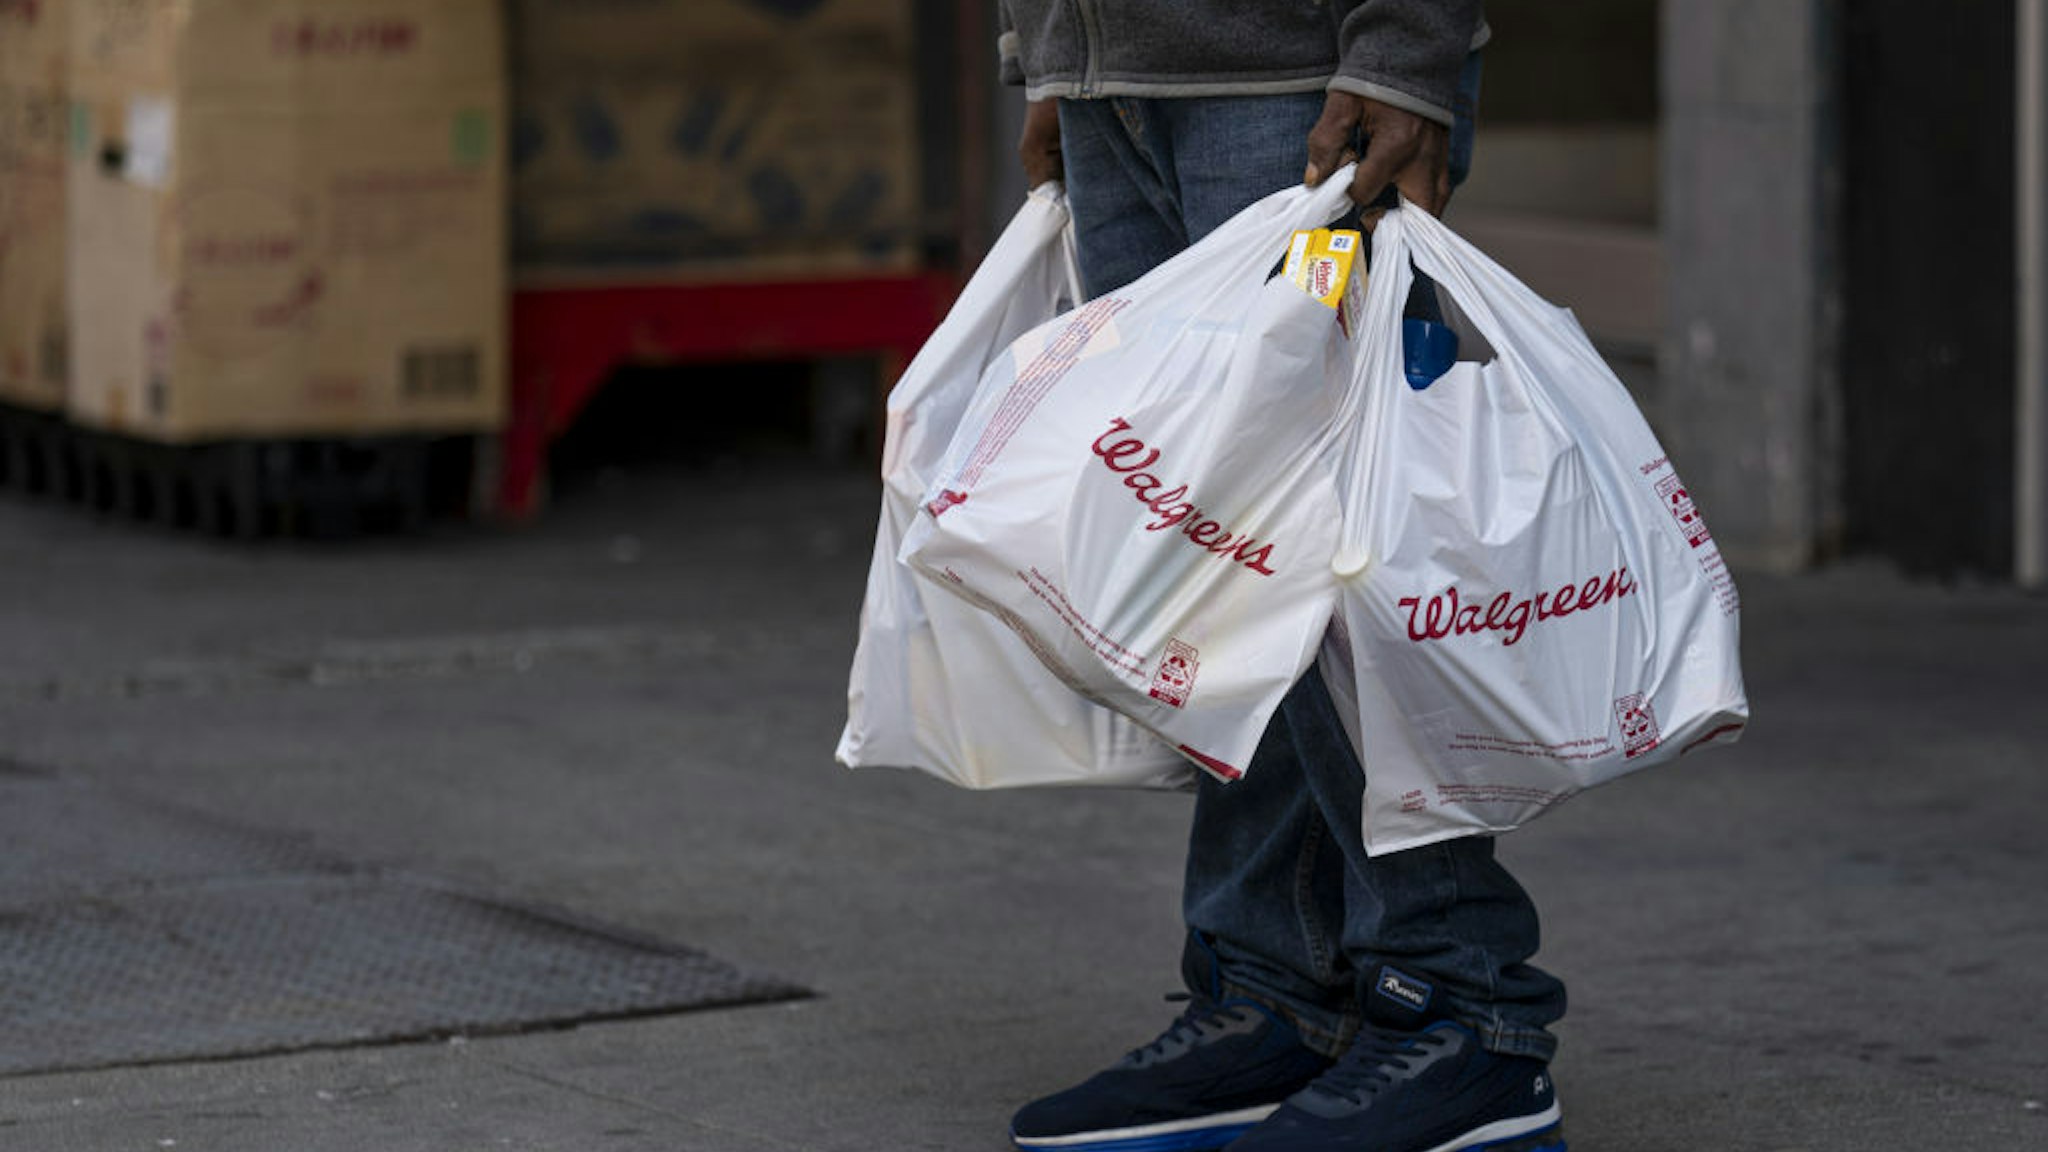 A person holds Walgreens shopping bags in front of a store in San Francisco, California, U.S., on Tuesday, April 13, 2021. Walgreens Boots Alliance Inc. is scheduled to release earnings figures on April 15. Photographer: David Paul Morris/Bloomberg via Getty ImagesA person holds Walgreens shopping bags in front of a store in San Francisco, California, U.S., on Tuesday, April 13, 2021. Walgreens Boots Alliance Inc. is scheduled to release earnings figures on April 15. Photographer: David Paul Morris/Bloomberg via Getty Images